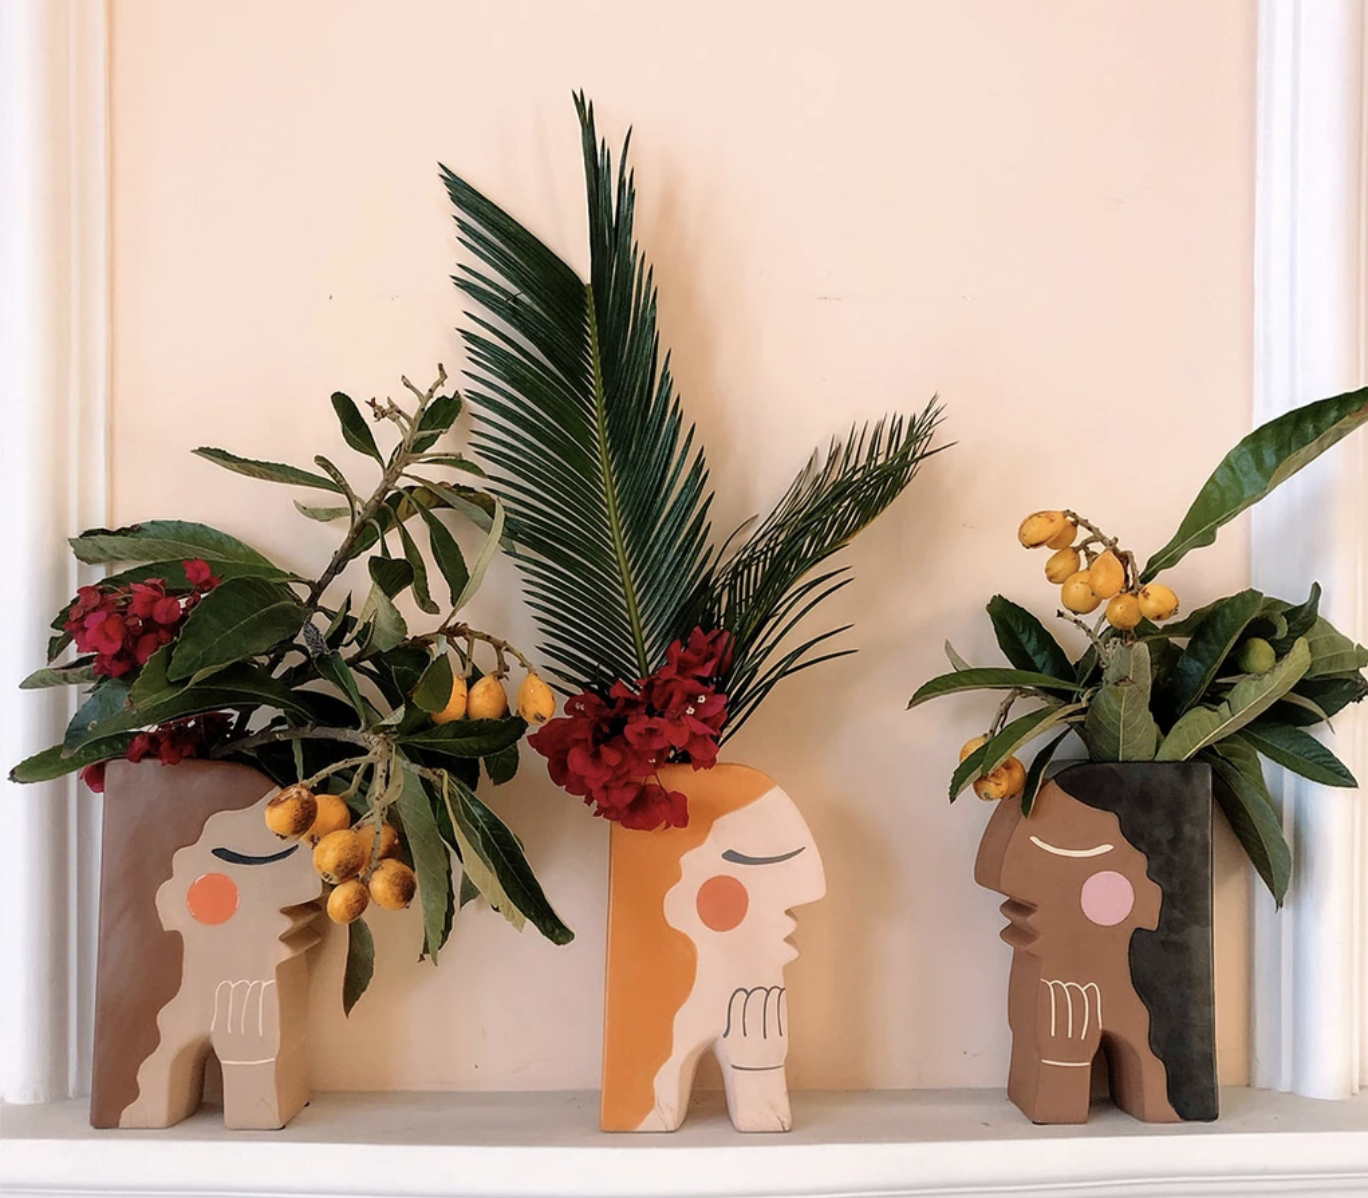 Three vases with different skin tones and hair colors display various types of leaves and fruit branches